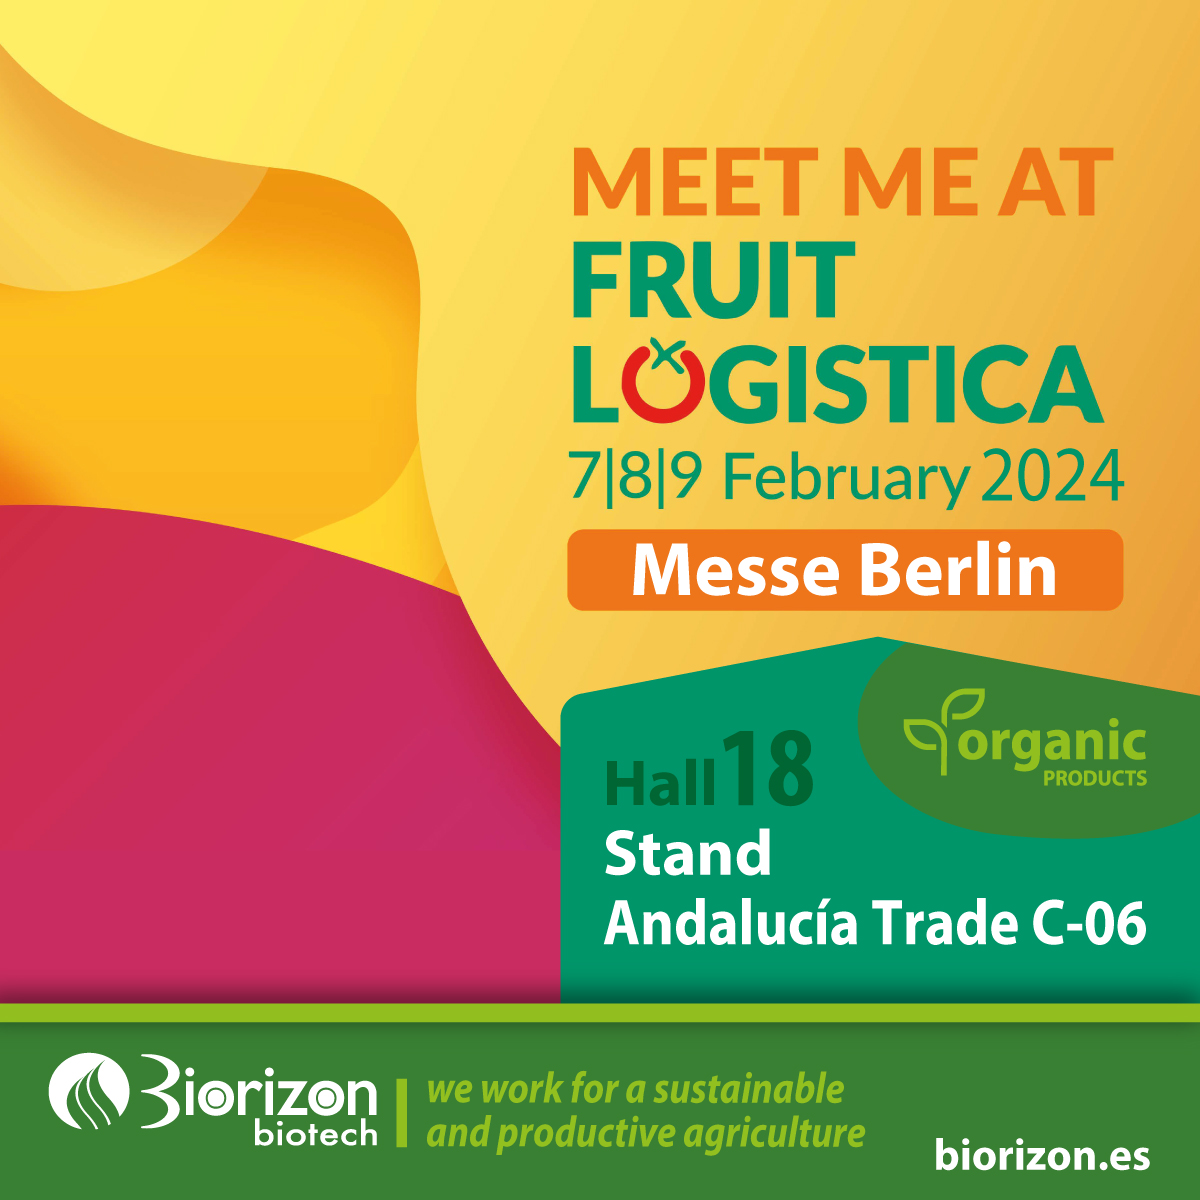 As in previous years, we are once again exhibiting at FRUIT LOGISTICA. We would like you to come to our Stand C-06 located in Hall 18 in the Andalucía TRADE area. #sustainableagriculture #circulareconomy #regenerativeagriculture #microalgae #certifiedbiostimulants #biopesticides